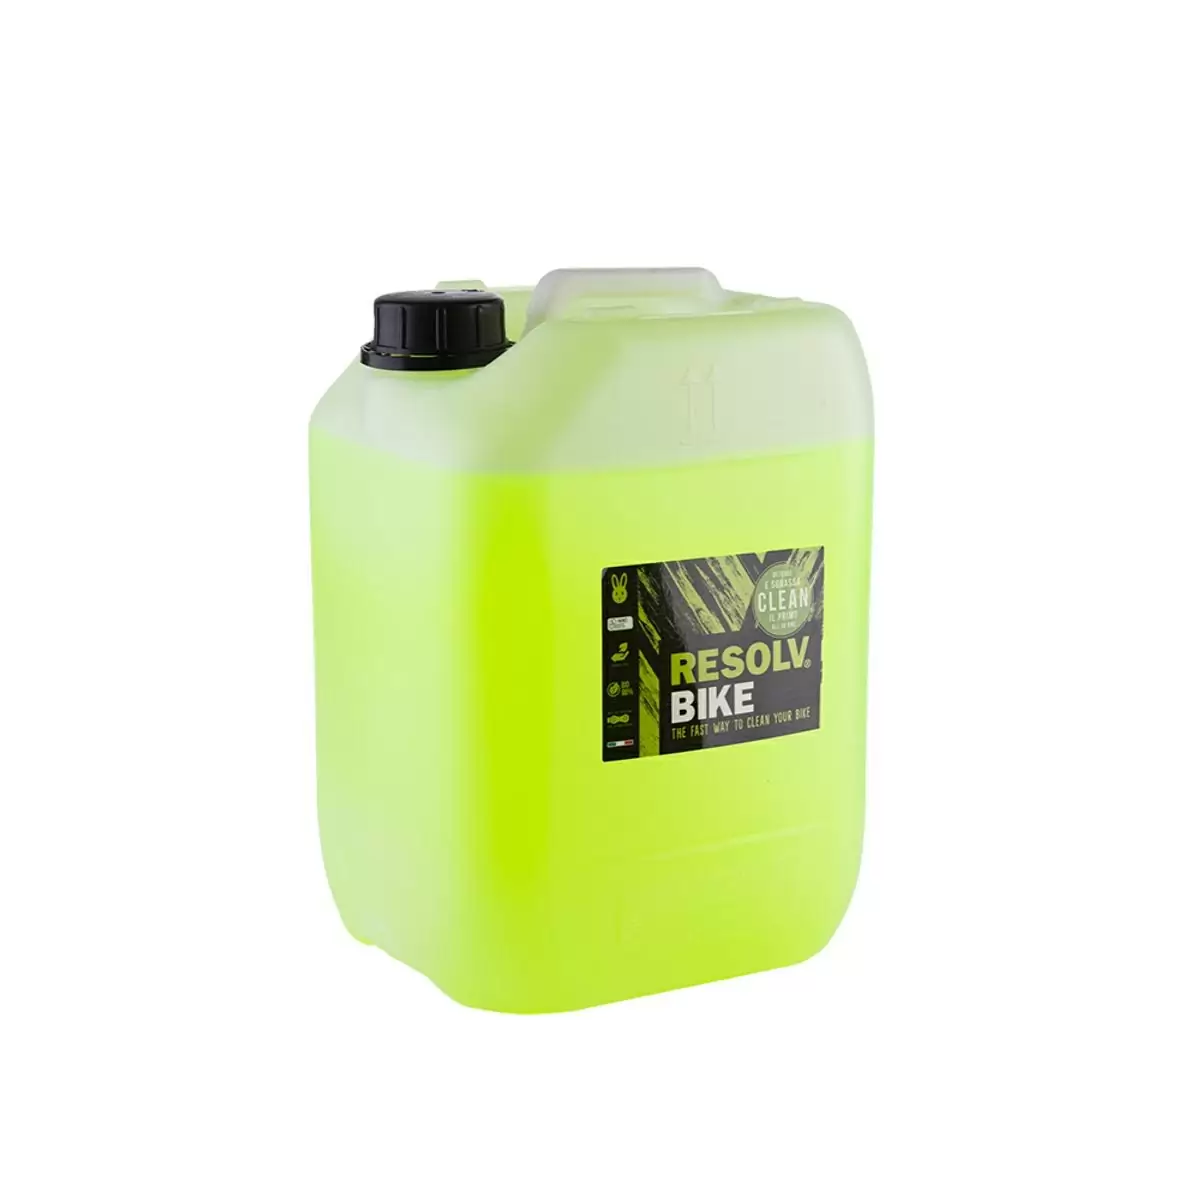 Clean Detergent For Bike Cleaning 20L - image